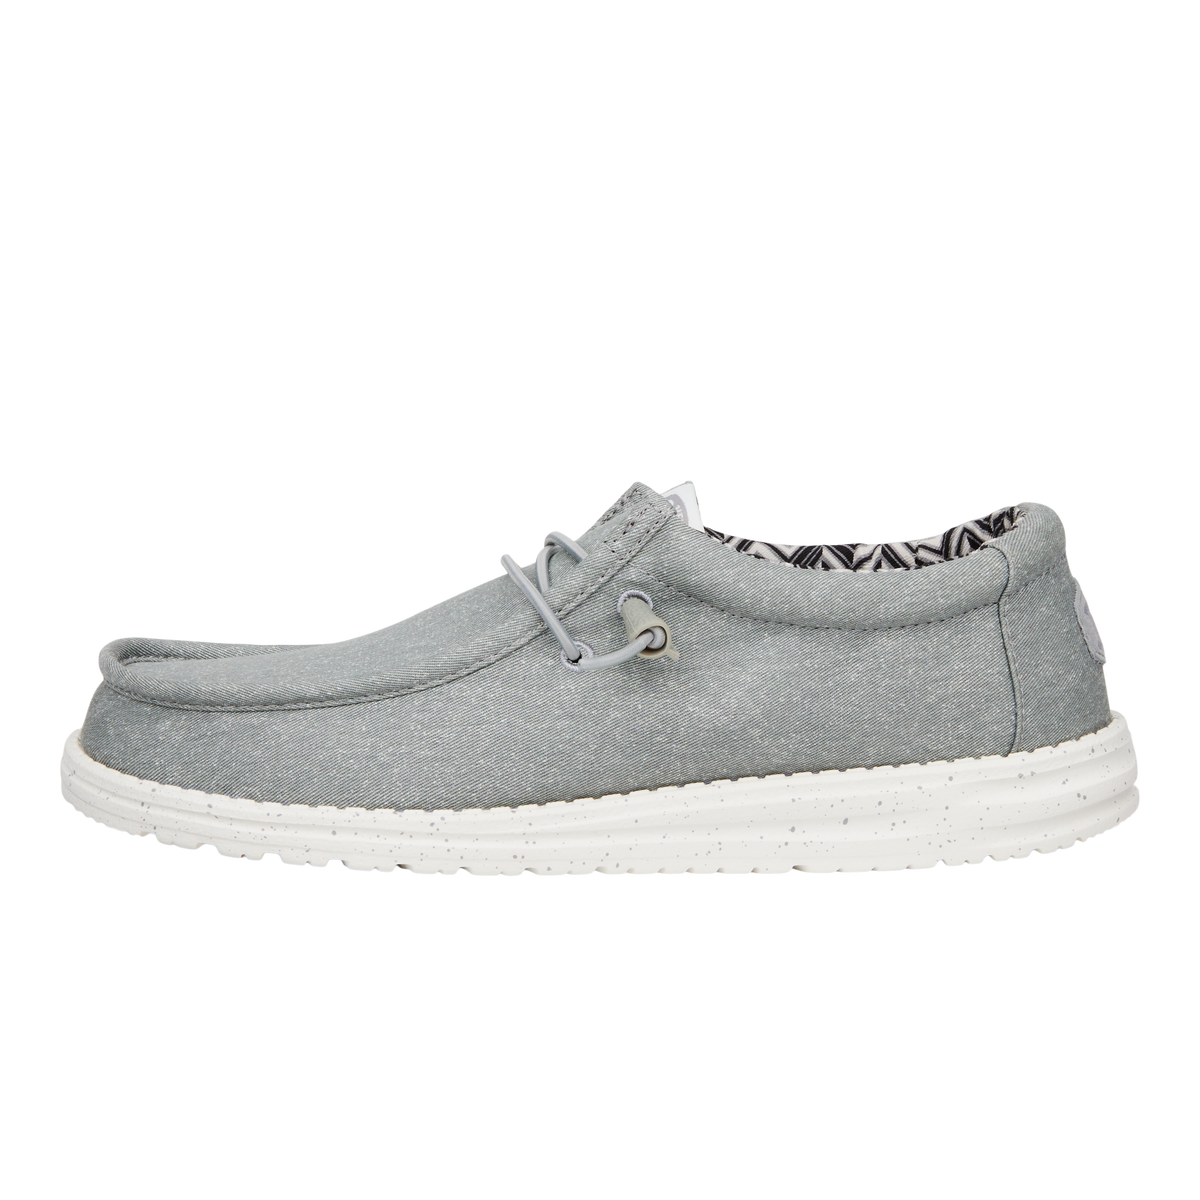 Wally Stretch Canvas Light Grey - Men's Casual Shoes